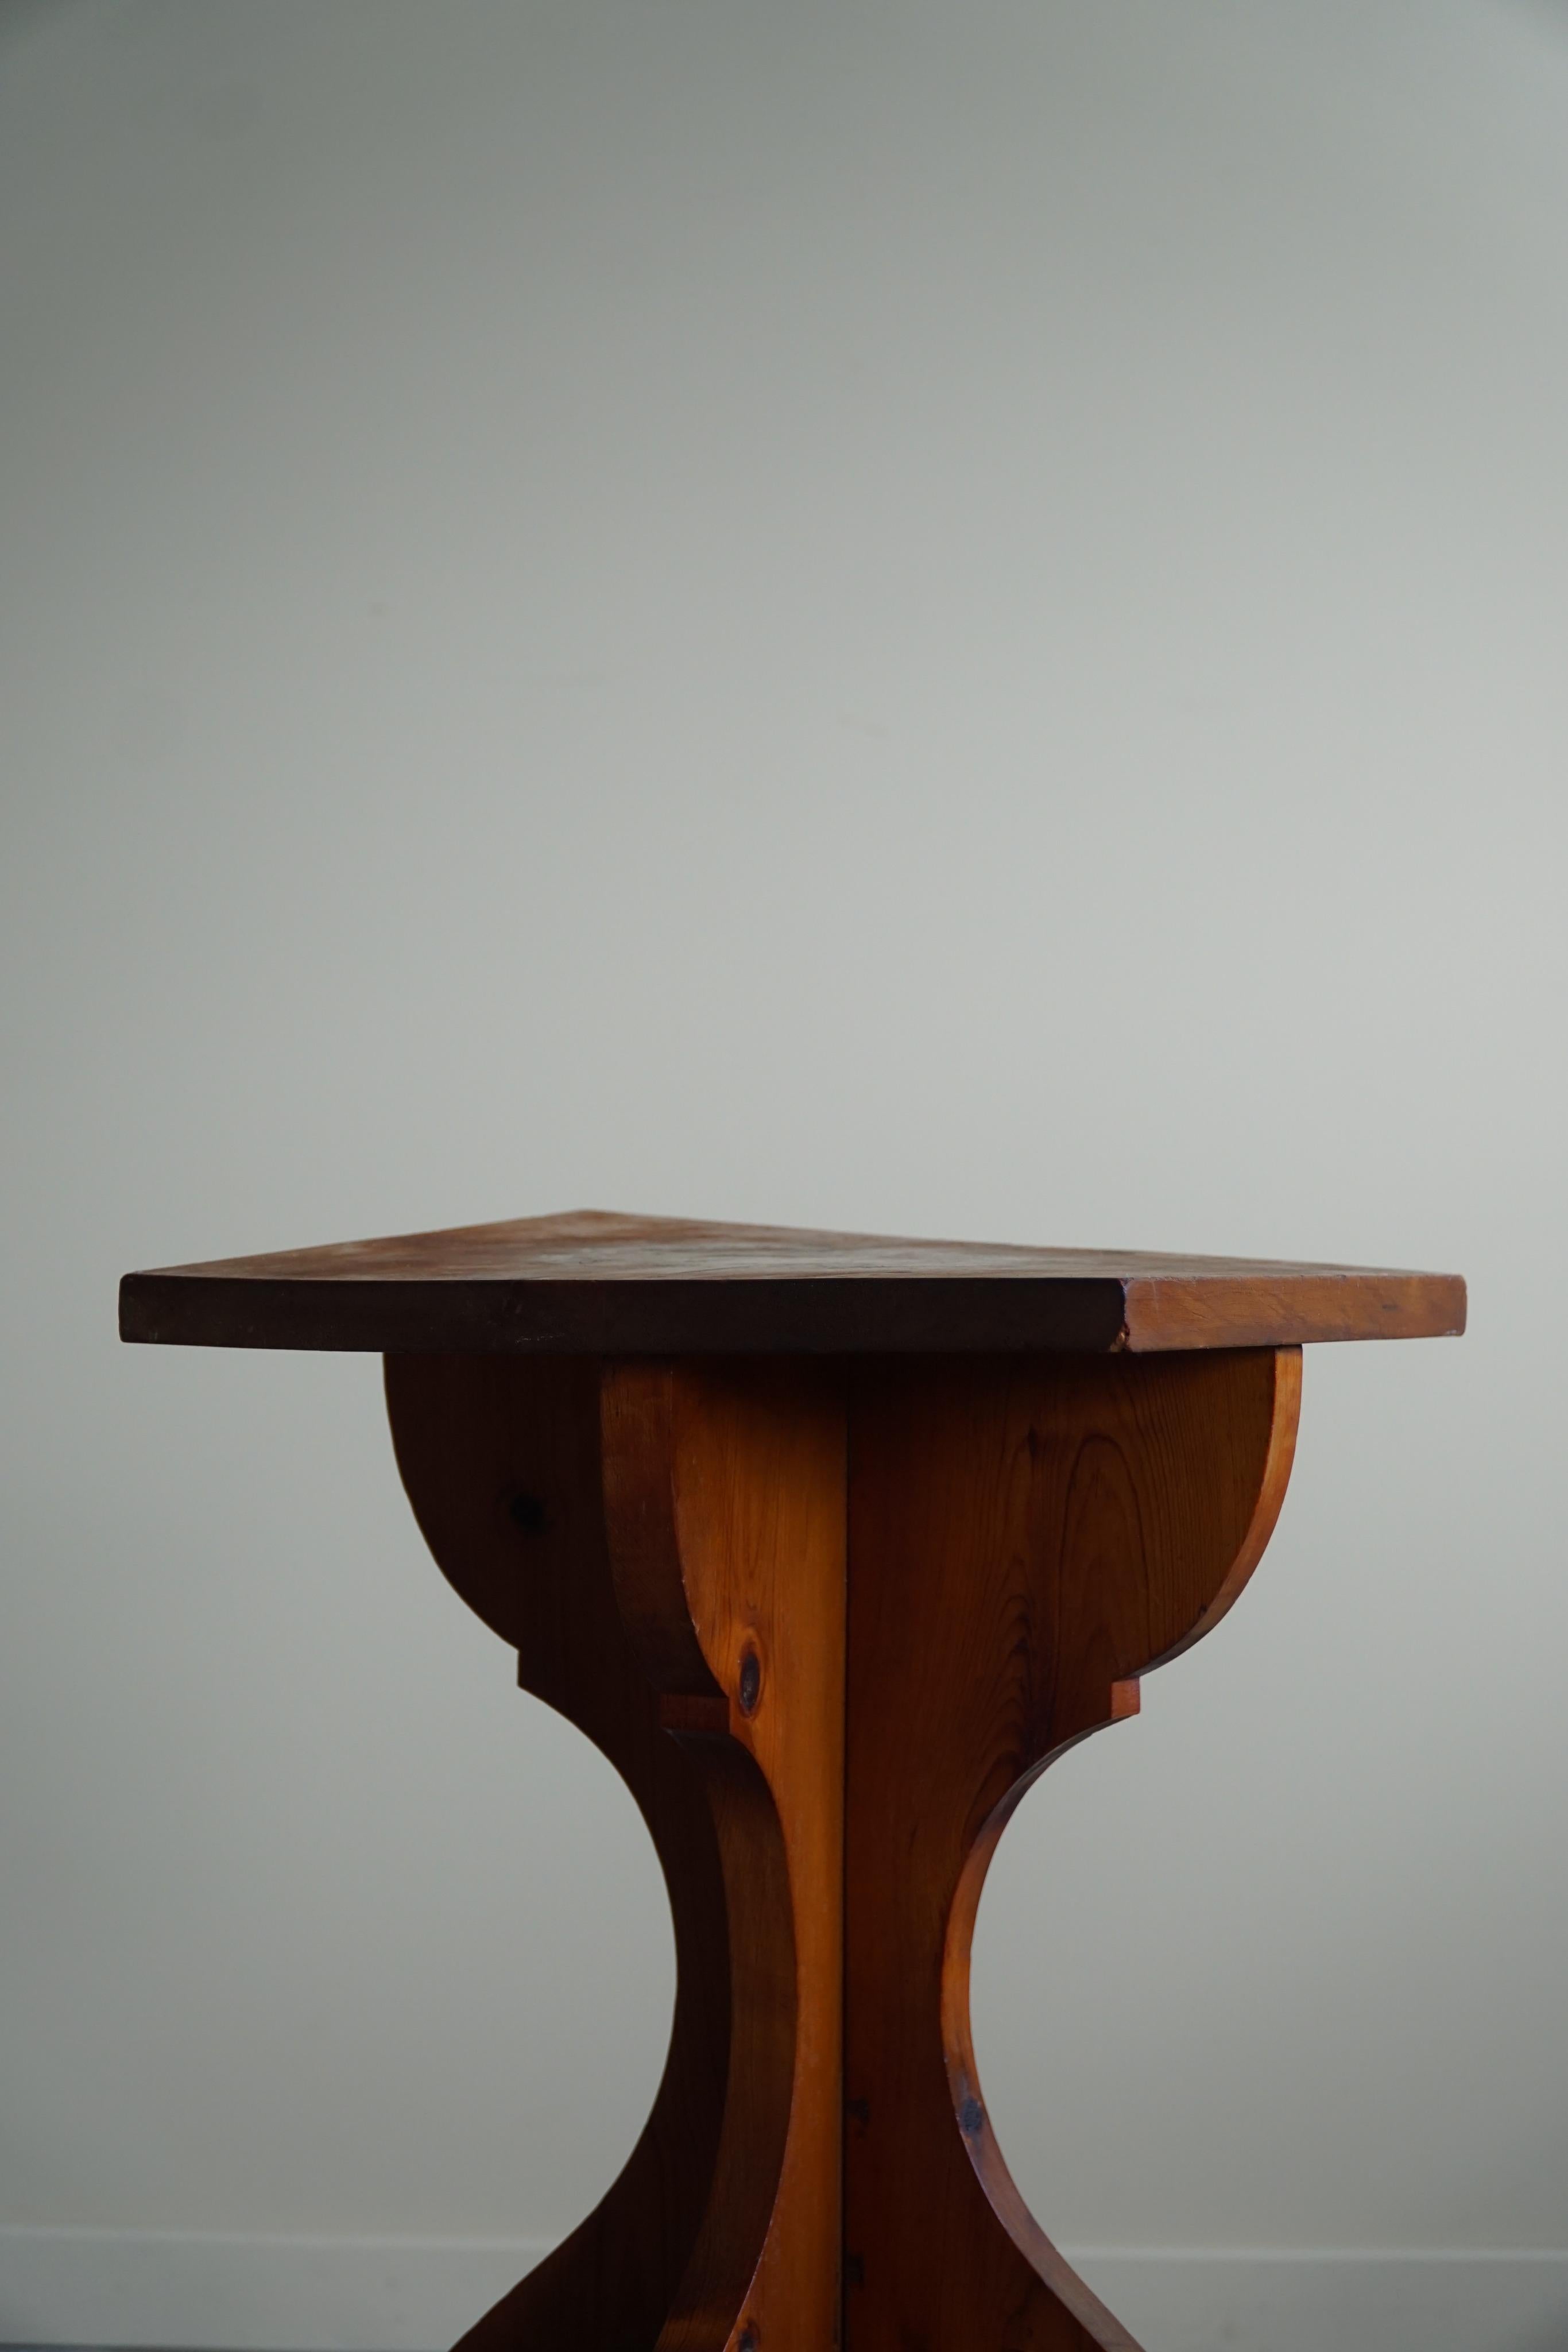 Hand-Crafted Rustic Square Side Table in Pine, Swedish Mid Century, 1950s